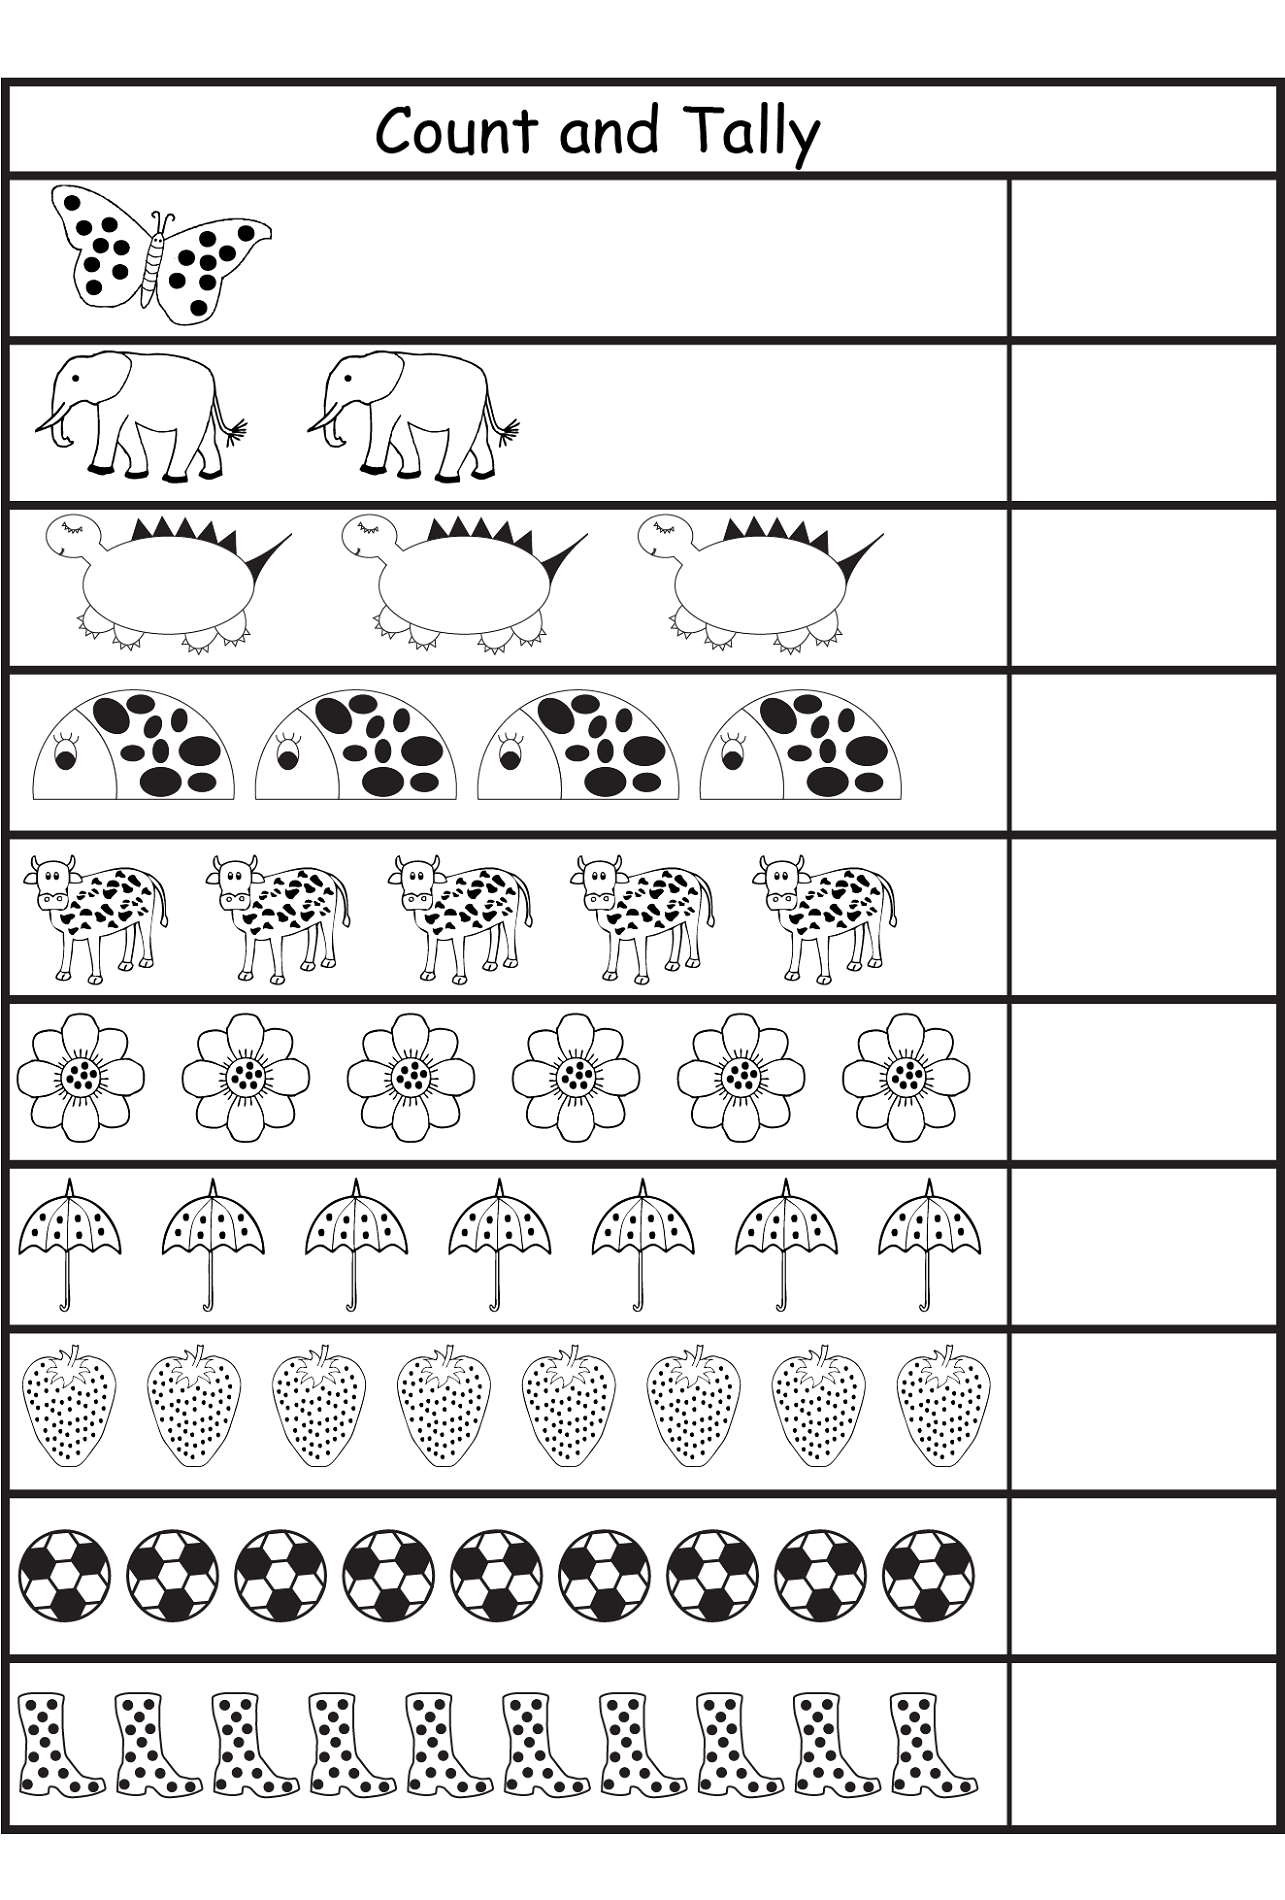 tally chart worksheets for kids activity shelter - thicker or thinner worksheetspre school activity sheetsdownloadable